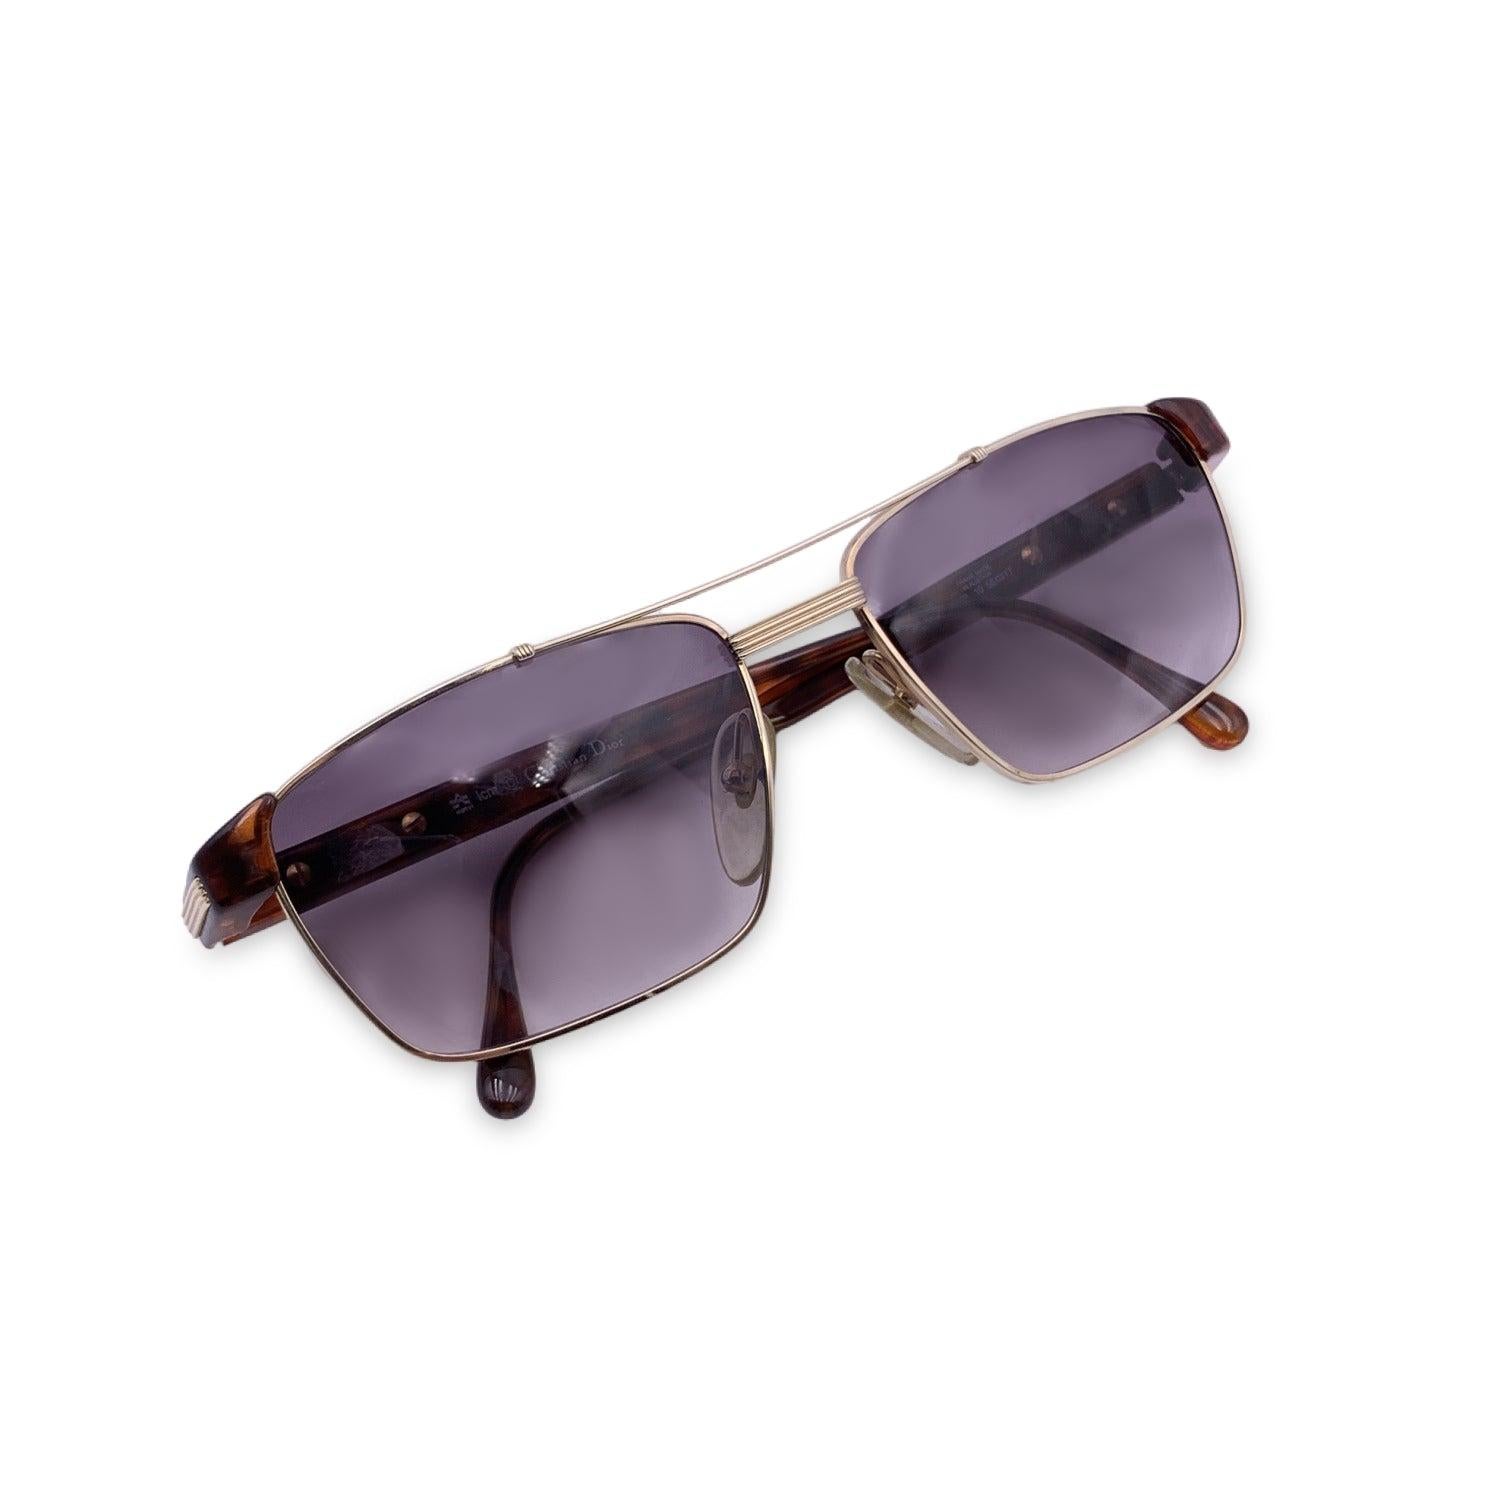 Vintage Christian Dior Unisex Sunglasses, Mod. 2678 10 Optyl. Size: 56/17 140mm. Gold metal frame with brown acetate temples. Gold CD logo con temples . 100% Total UVA/UVB protection. Brown gradient lenses. Details MATERIAL: Metal COLOR: Gold MODEL: